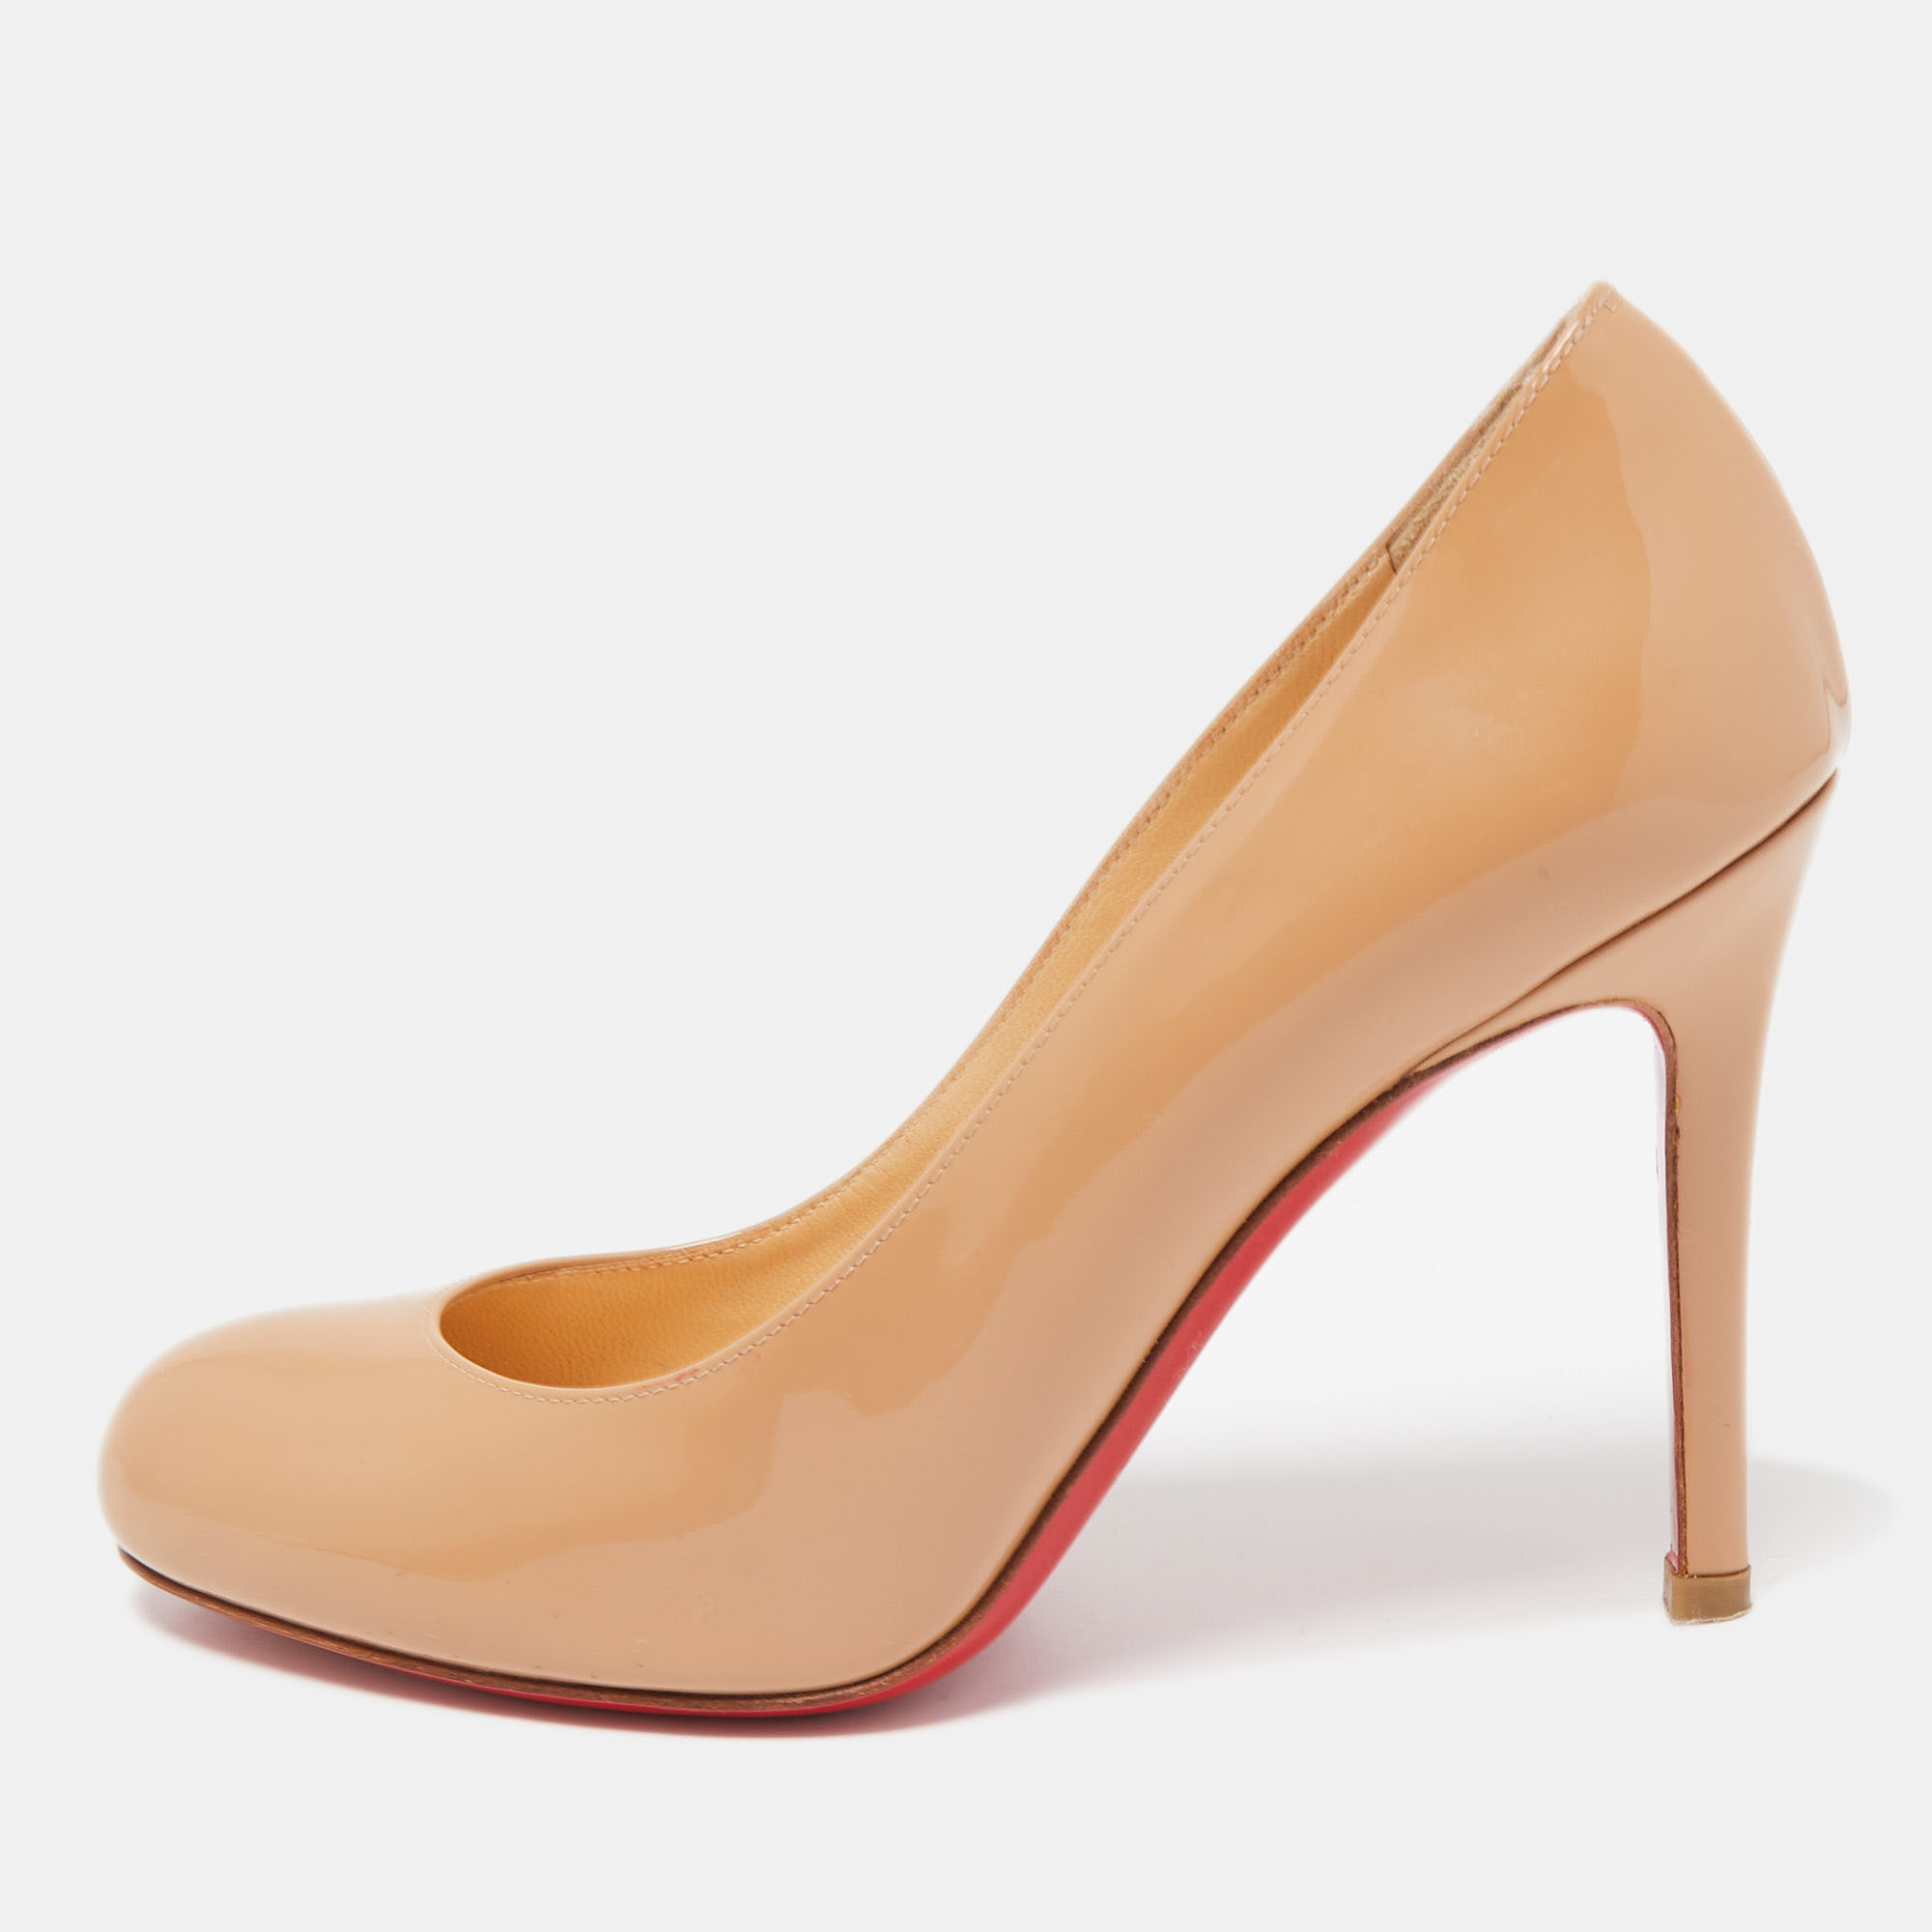 Pre-owned Christian Louboutin Beige Patent Simple Pumps Size 35.5